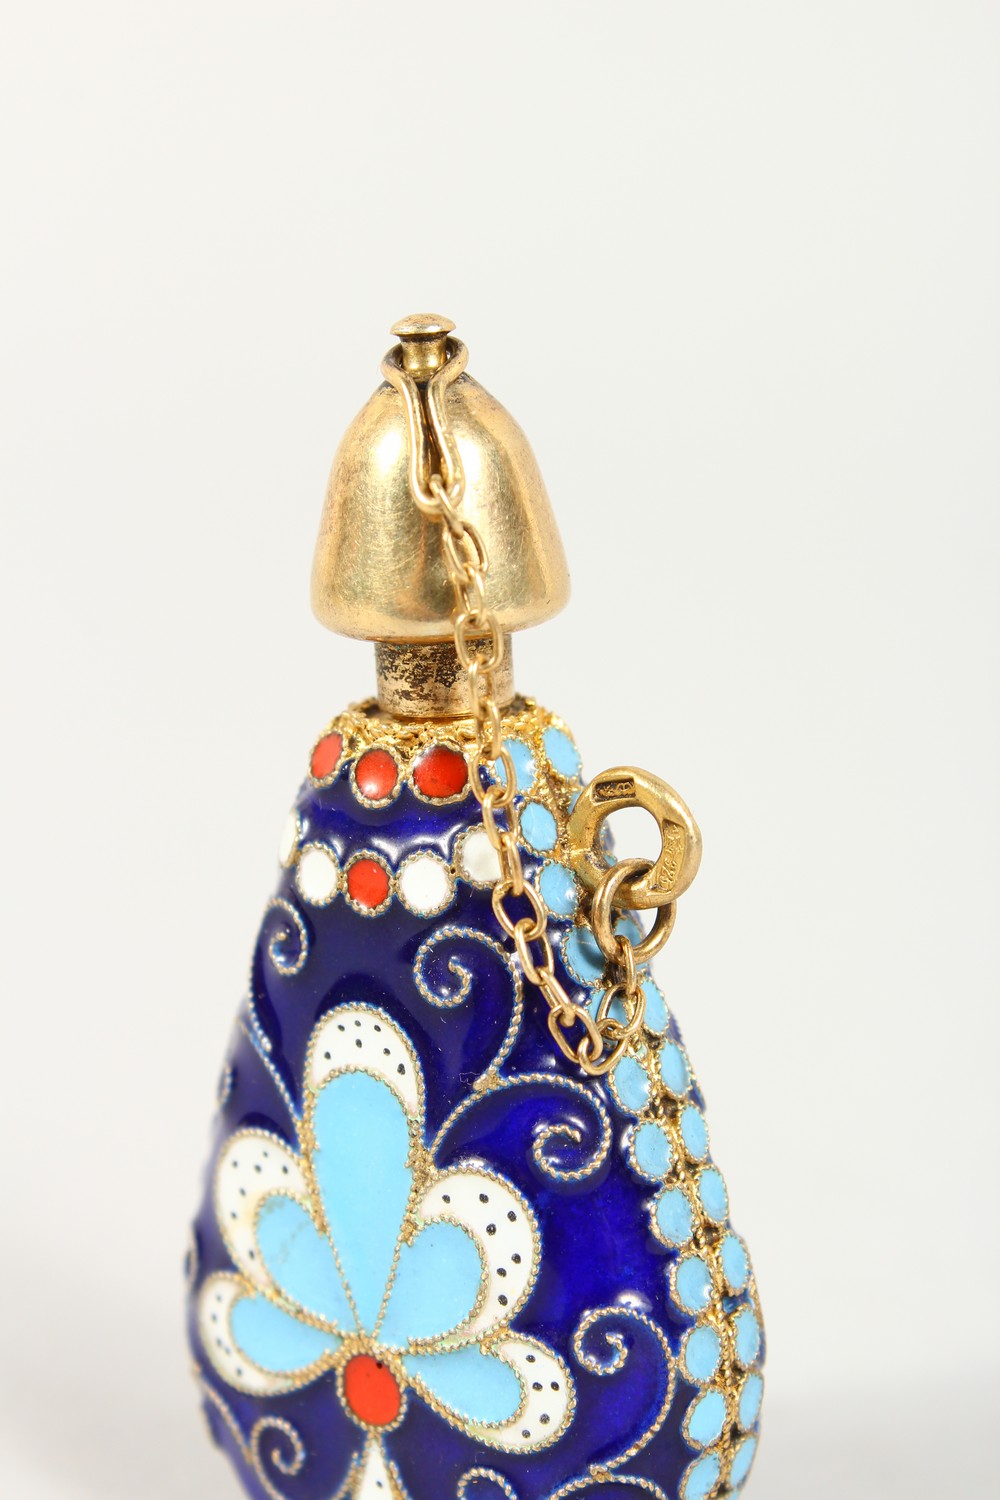 A SMALL RUSSIAN ENAMEL SCENT BOTTLE. 2.5ins. - Image 2 of 8